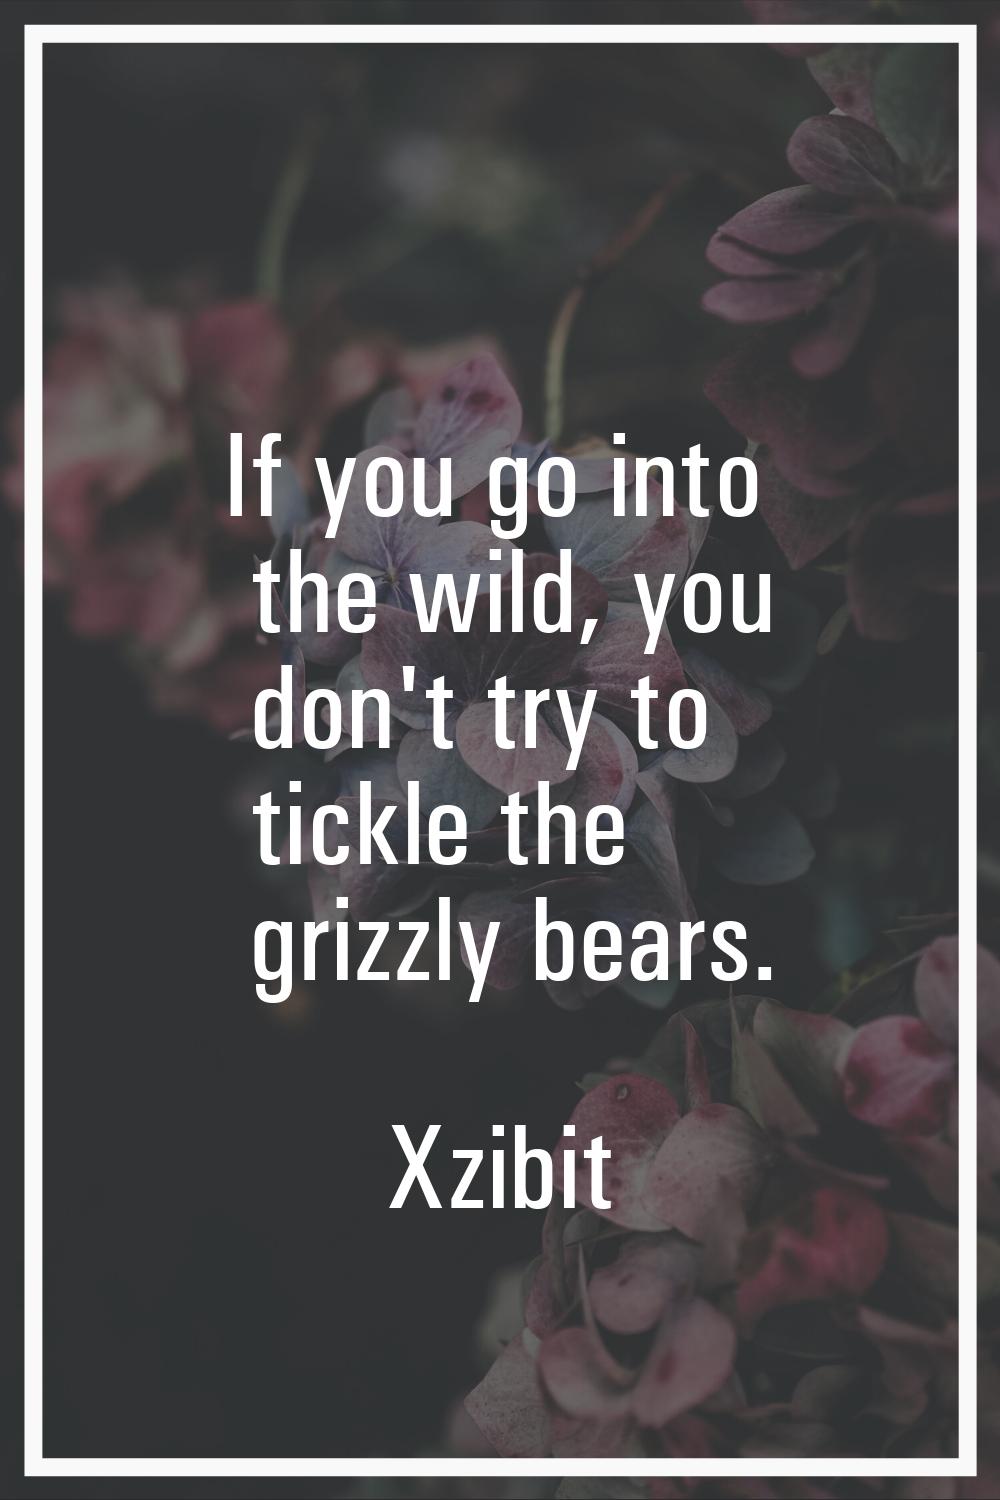 If you go into the wild, you don't try to tickle the grizzly bears.